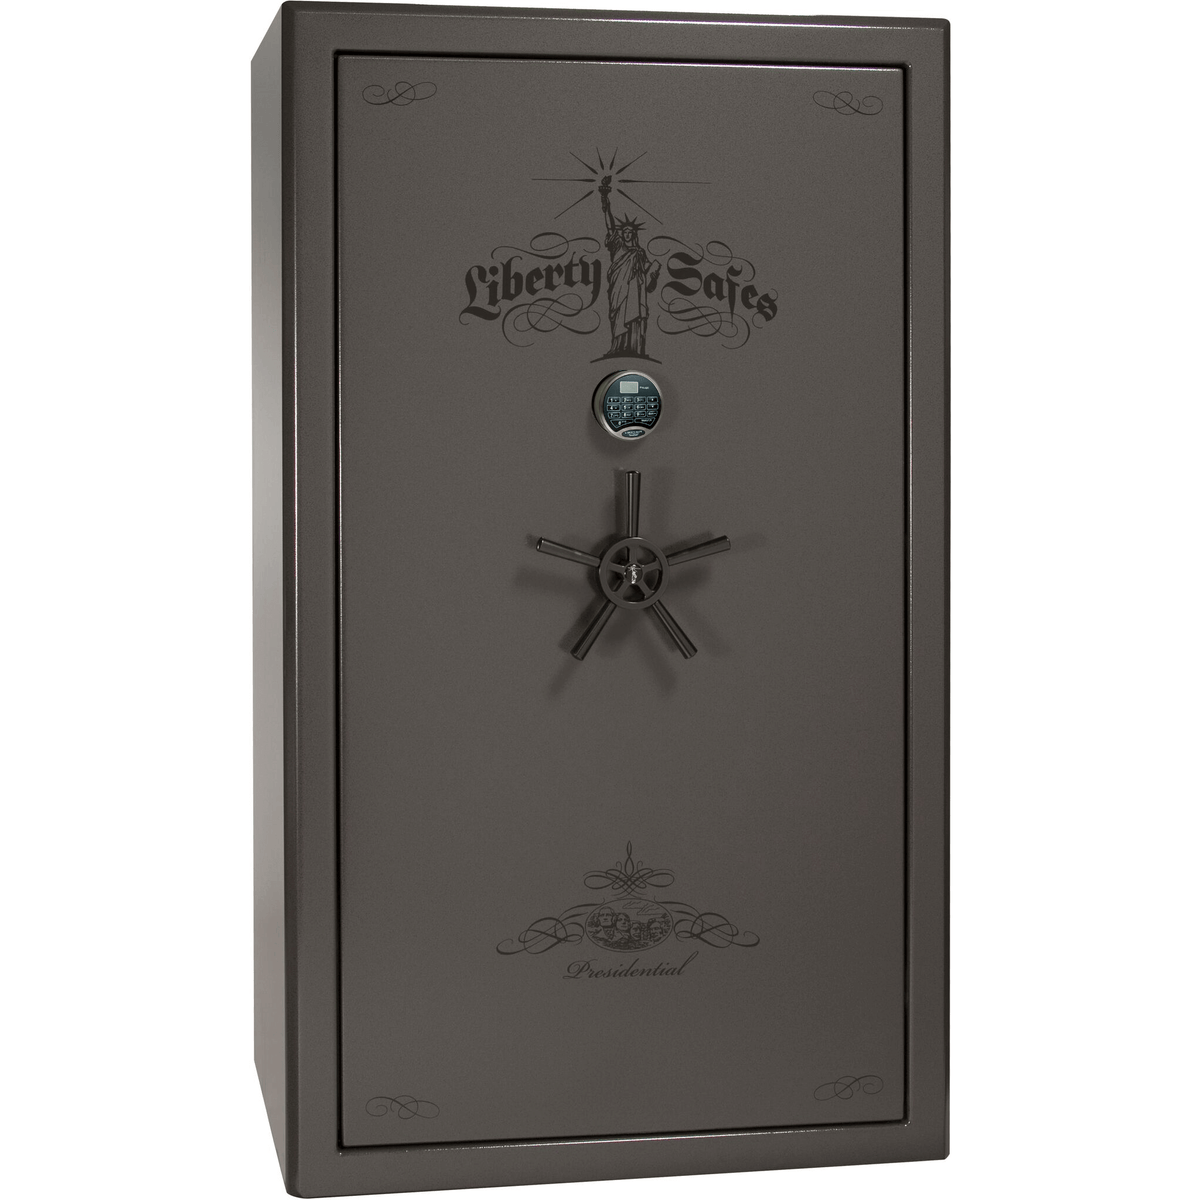 Liberty Safe Presidential 50 in Gray Marble with Black Chrome Electronic Lock, closed door.